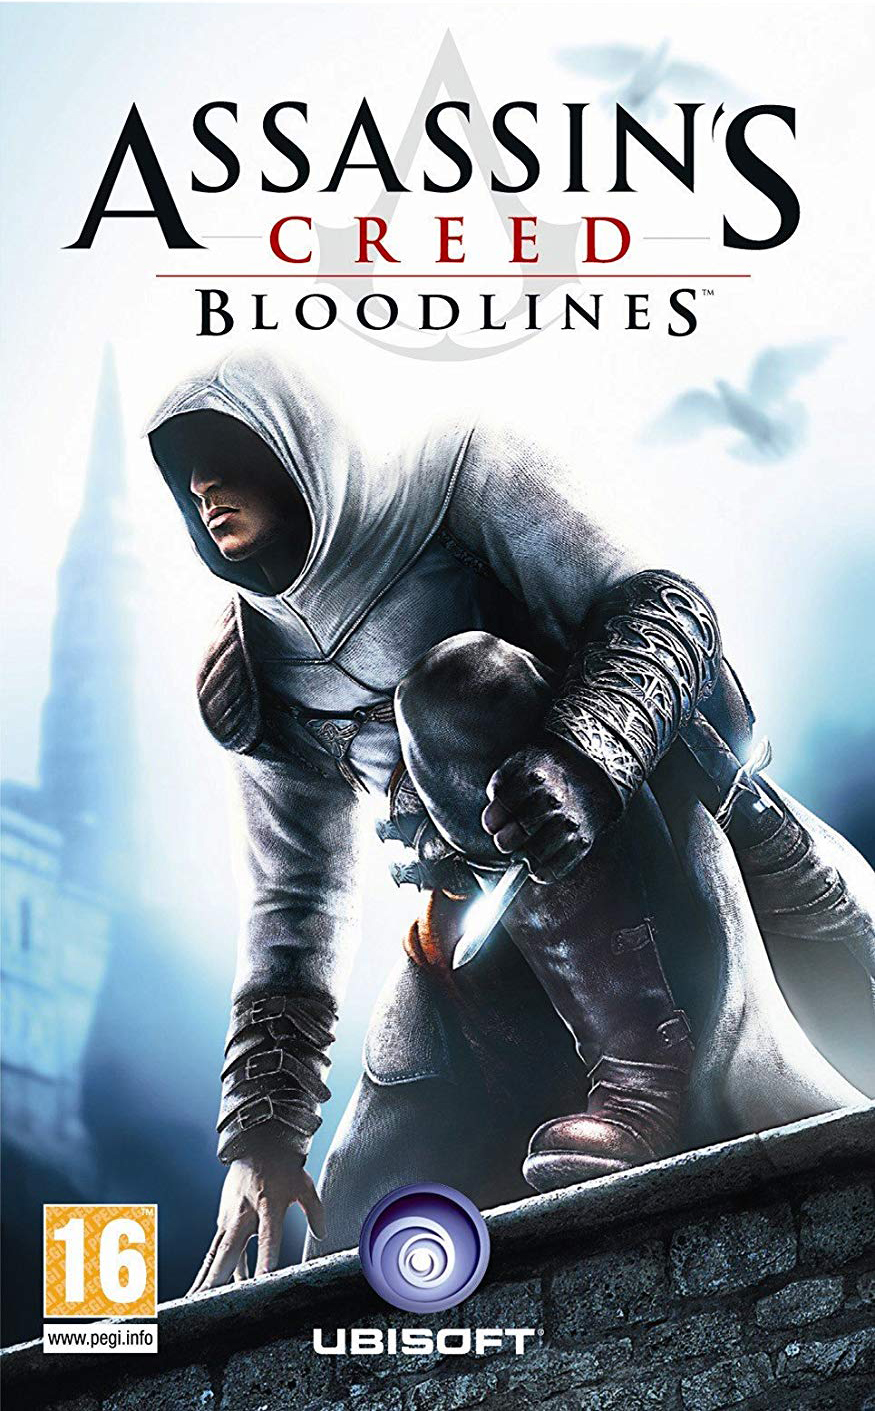 time to beat assassins creed bloodlines